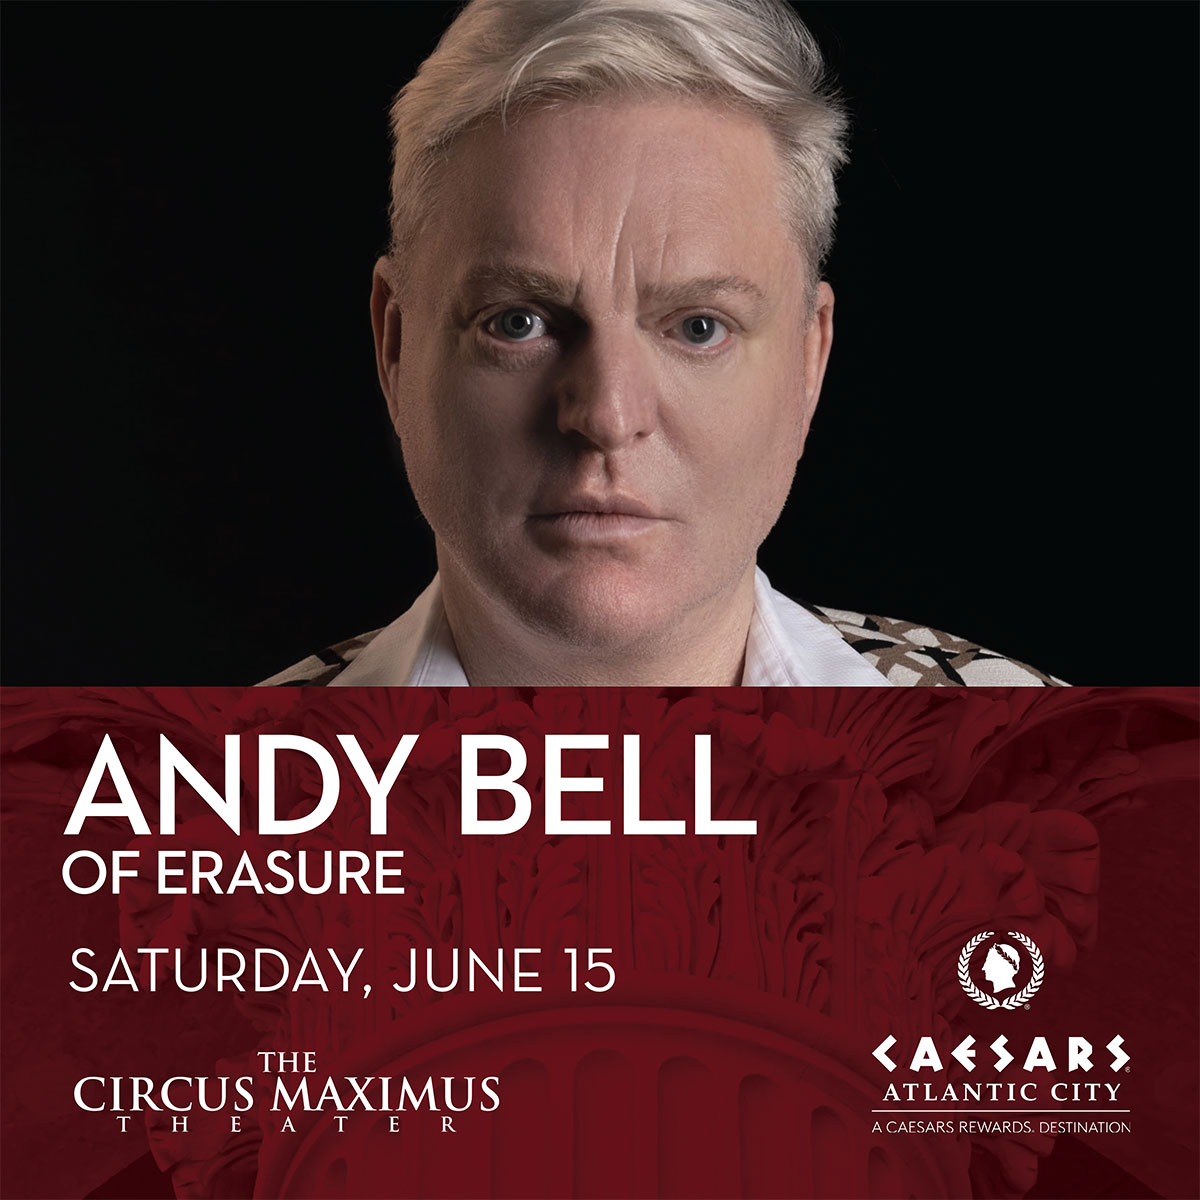 We are excited to announce that Andy Bell will be playing a US show at the Circus Maximus Theater at Caesars Atlantic City on 15th June. Tickets go on general sale on Friday but you can access the pre-sale TODAY using code EISACCESS.❤️ TICKETS & INFO: ticketmaster.com/event/02006073…